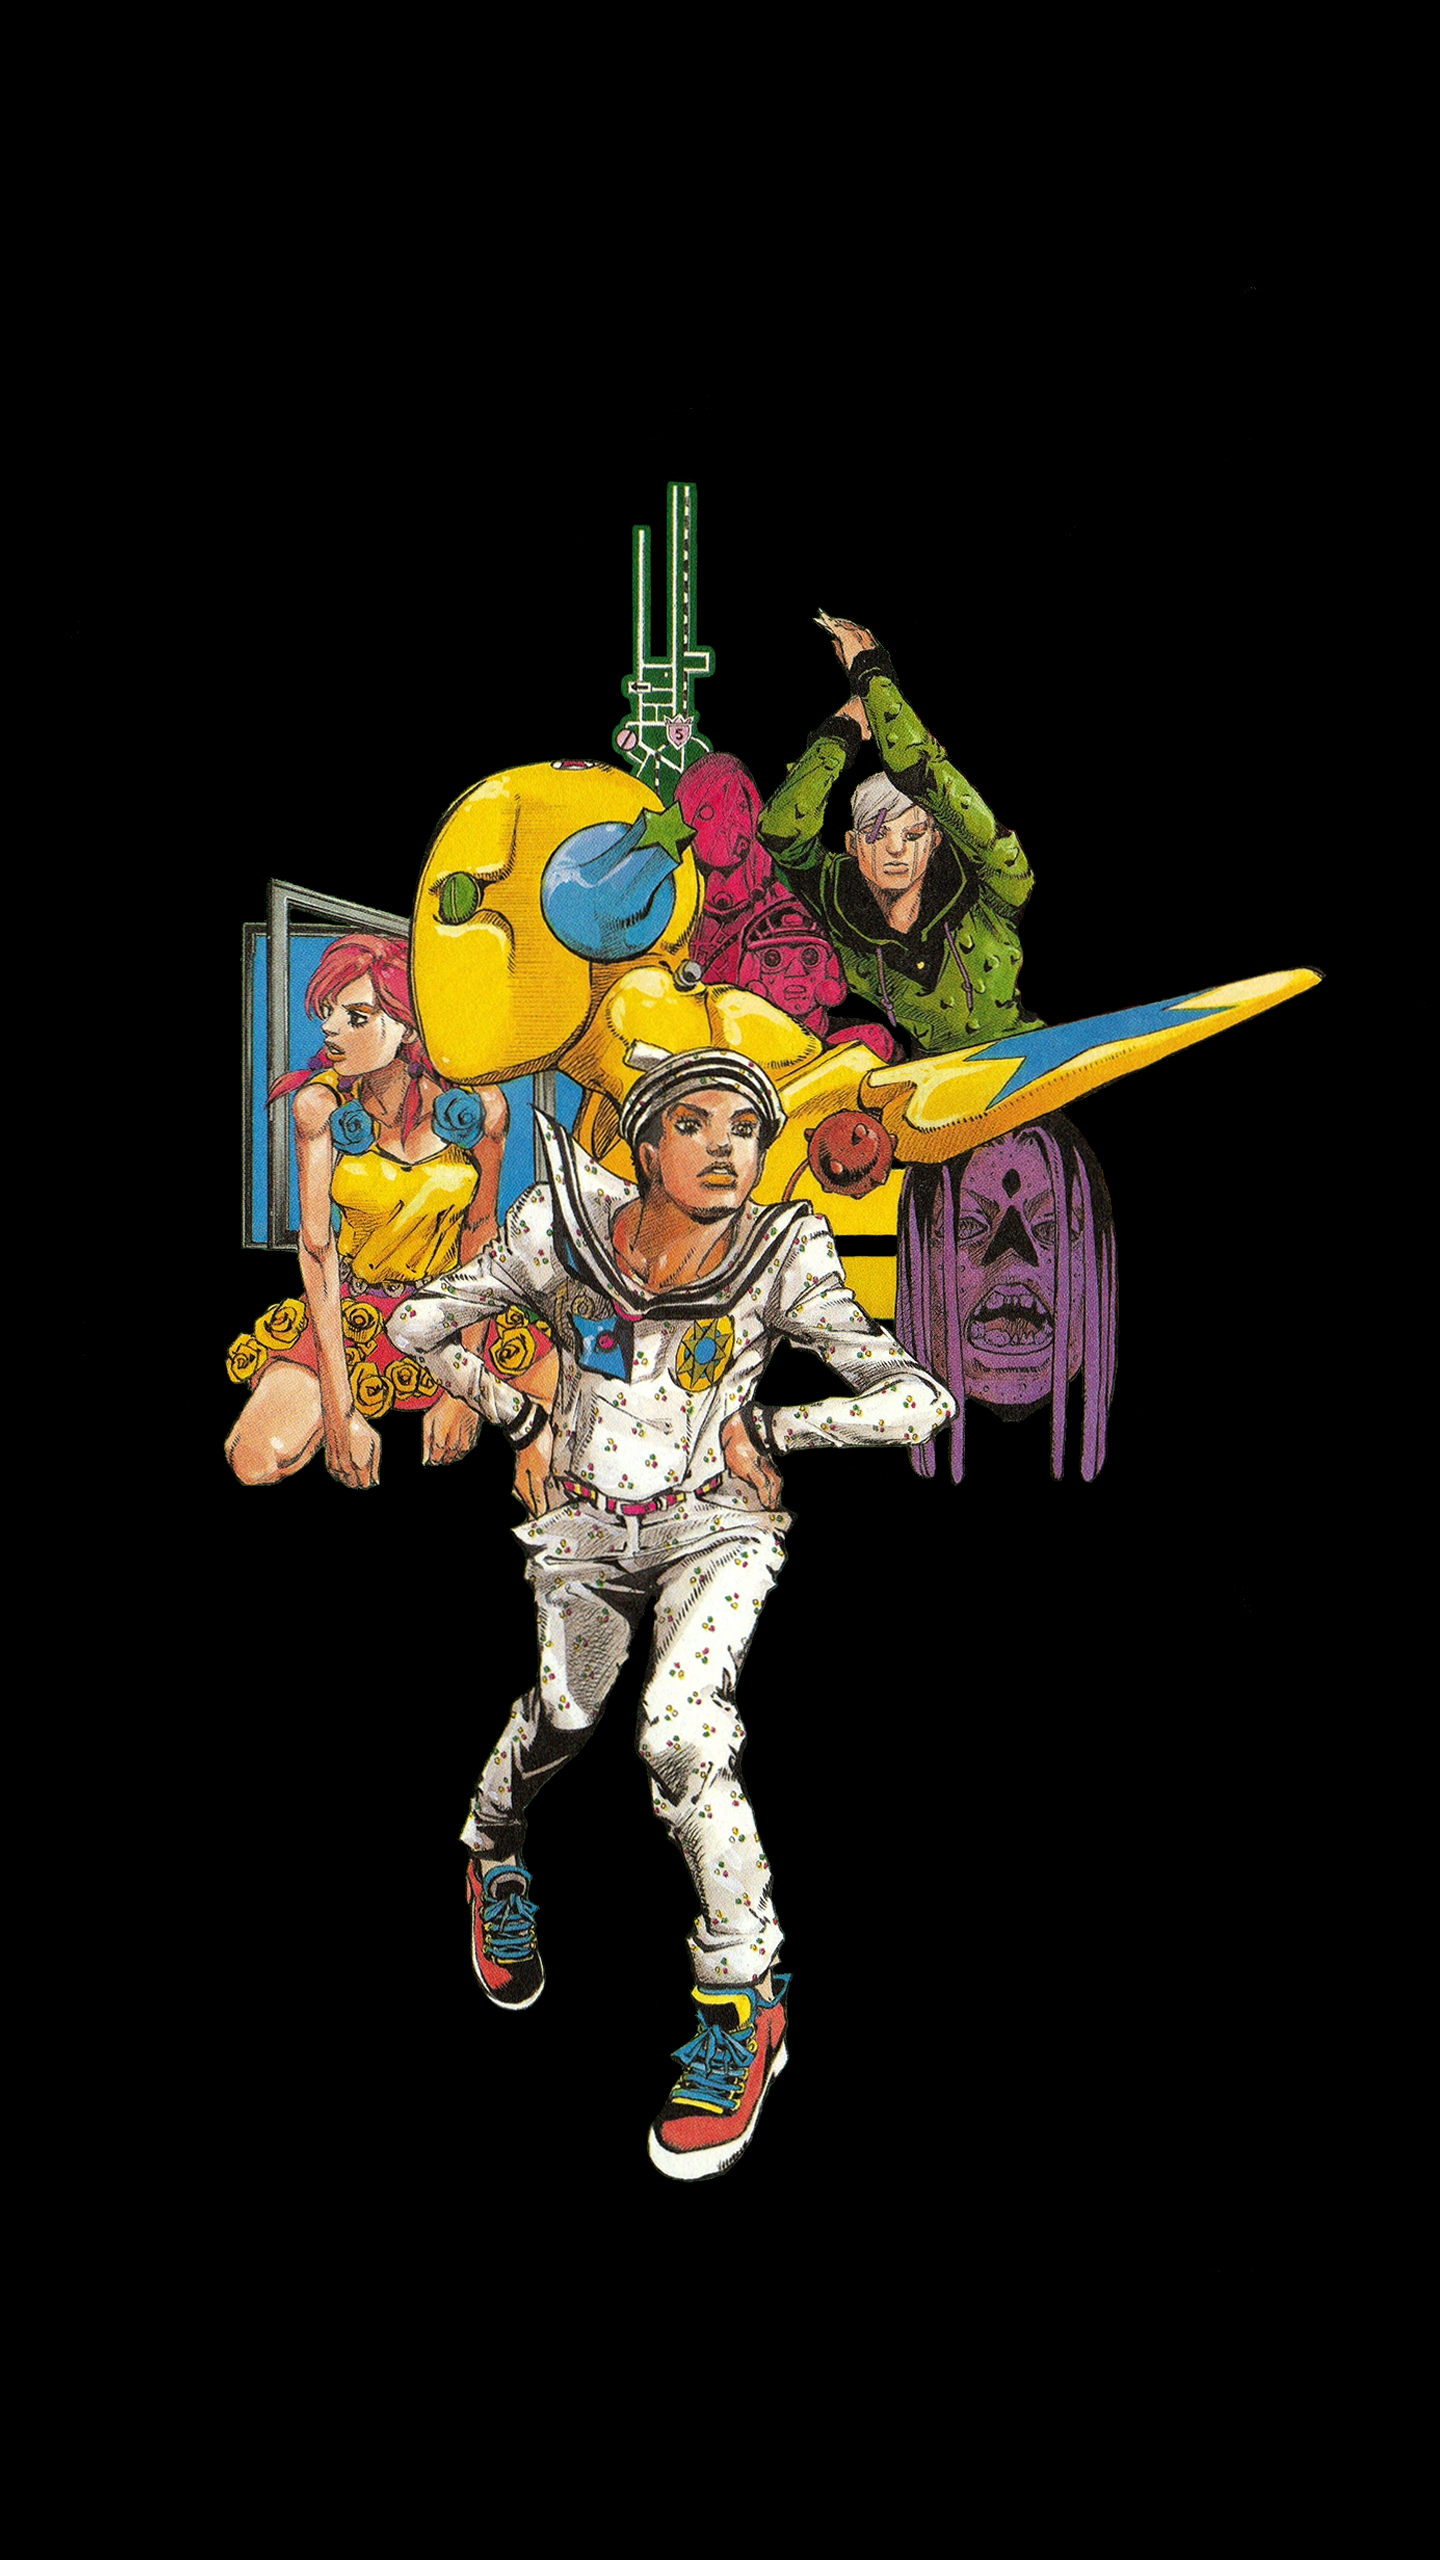 Posting a wallpaper a day until stone ocean is animated day 12: JoJolion